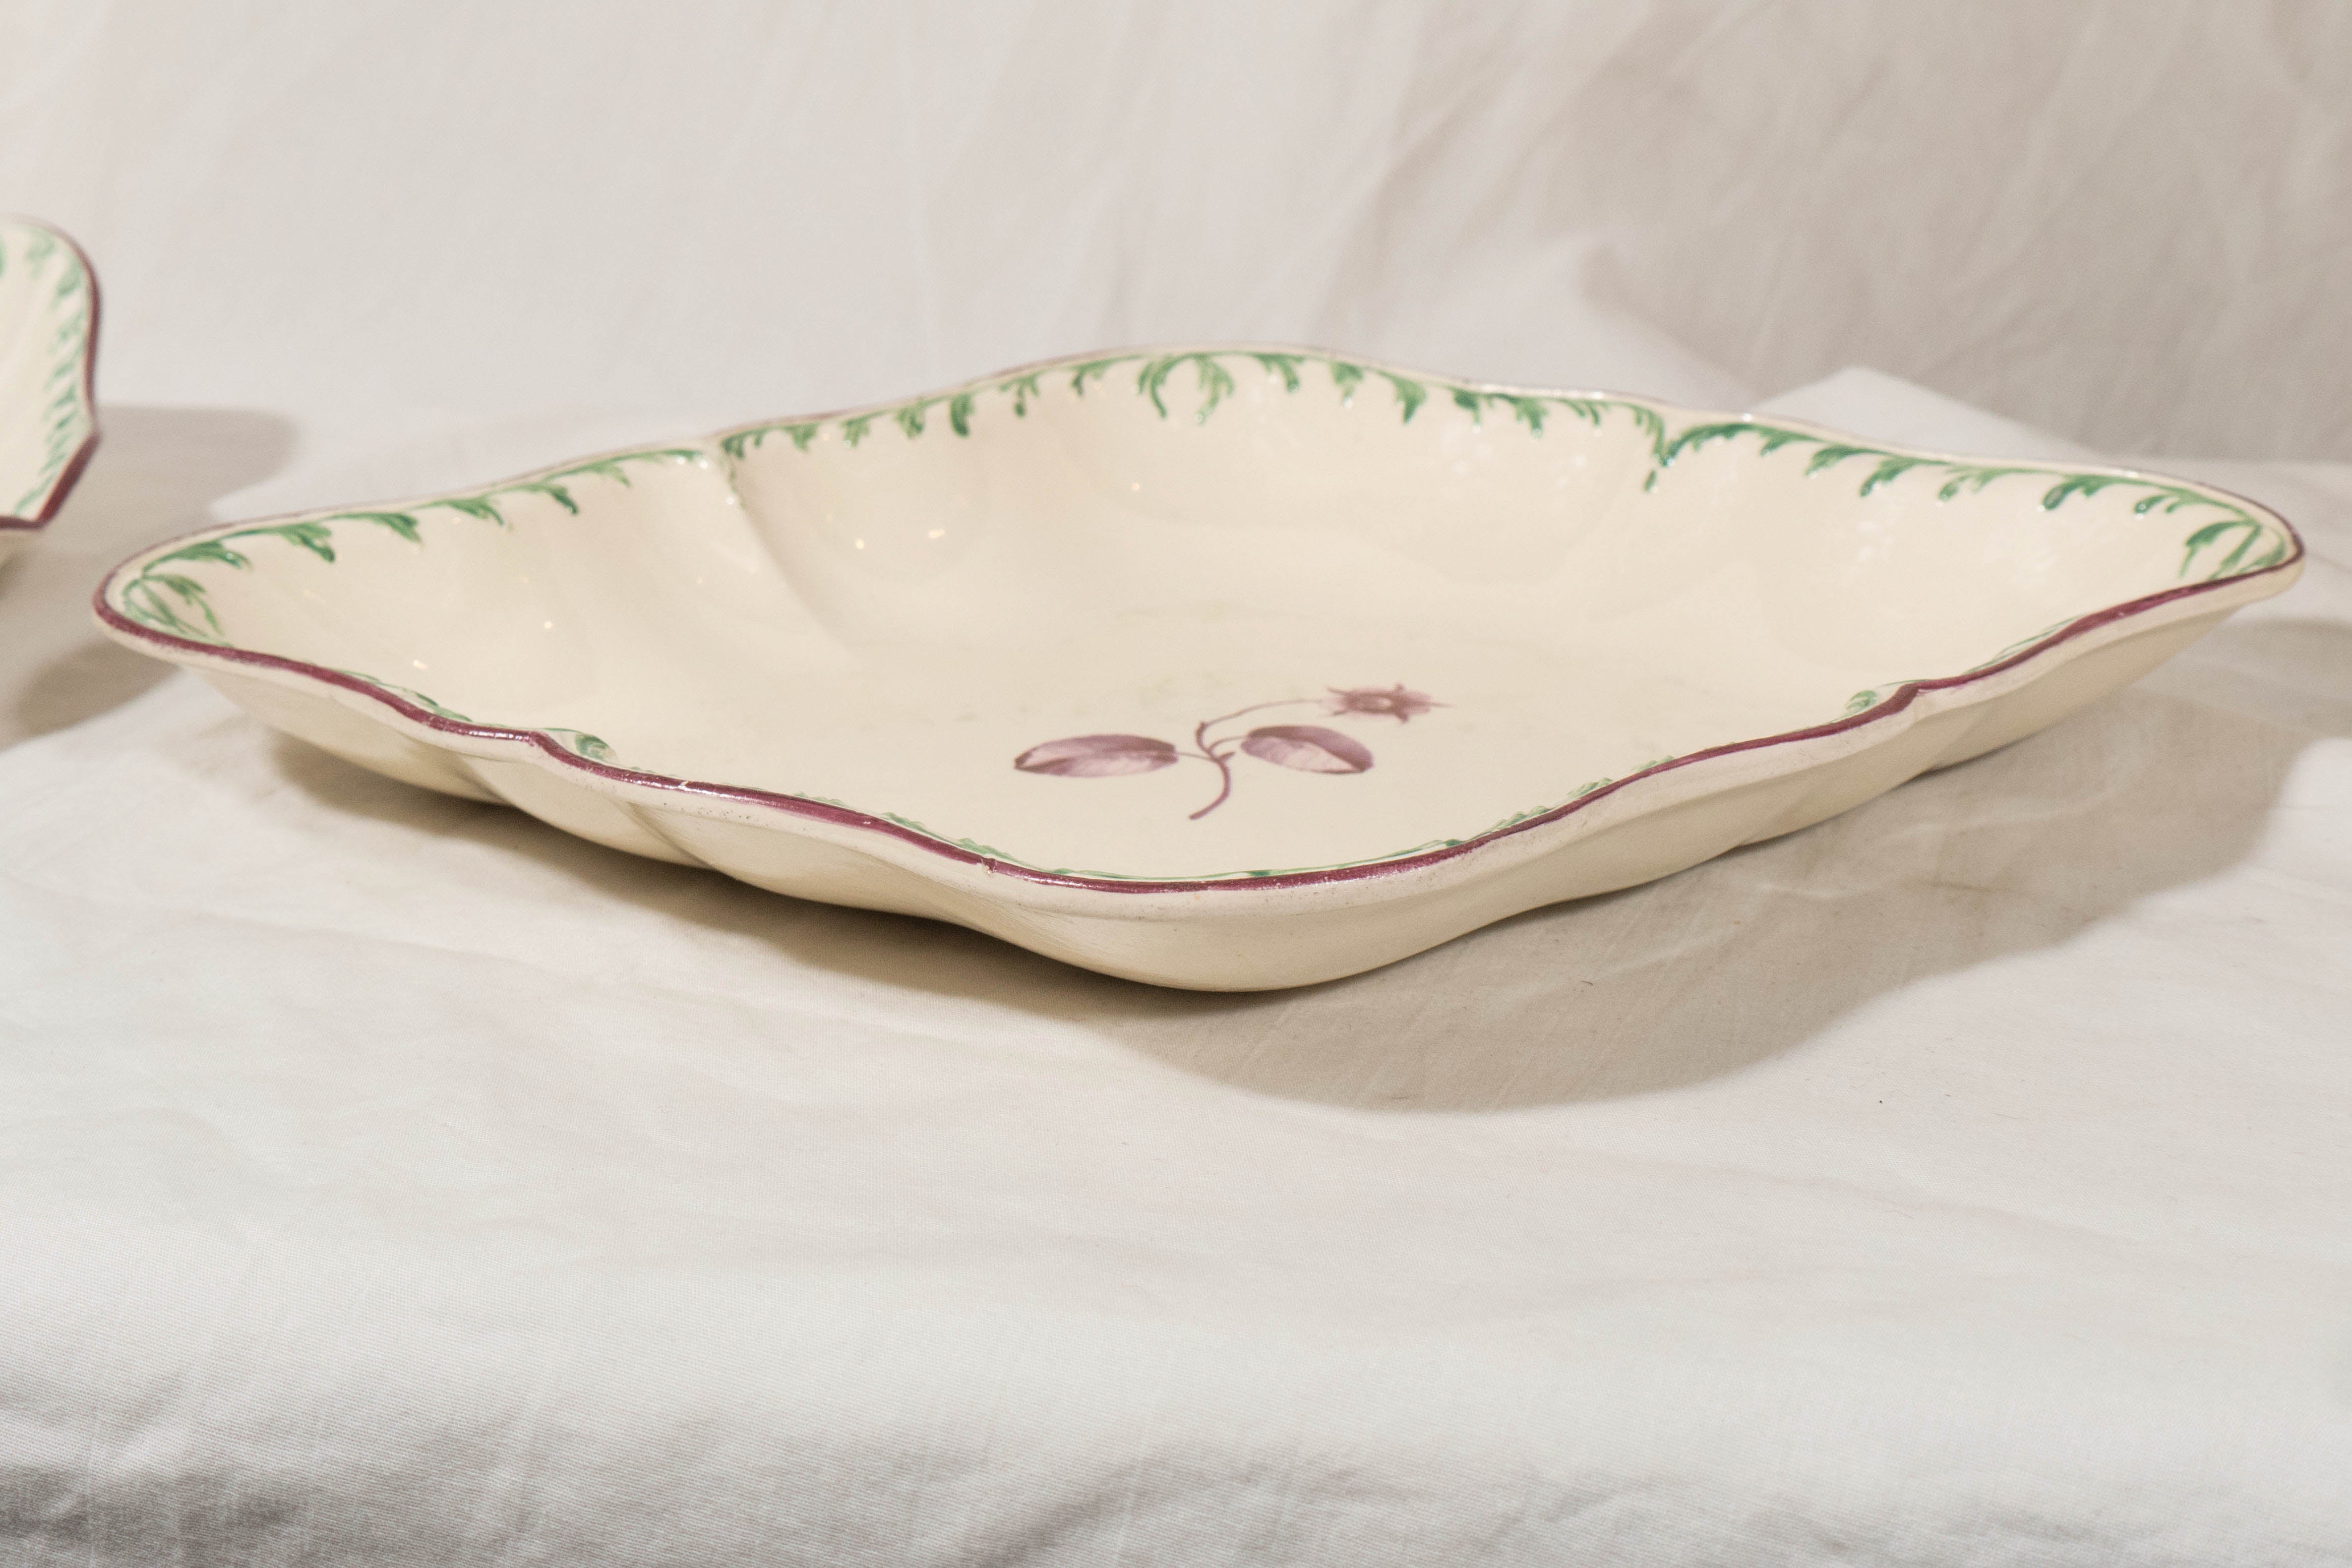 Amtique Wedgwood Creamware Dishes with Green Feather Edge 1